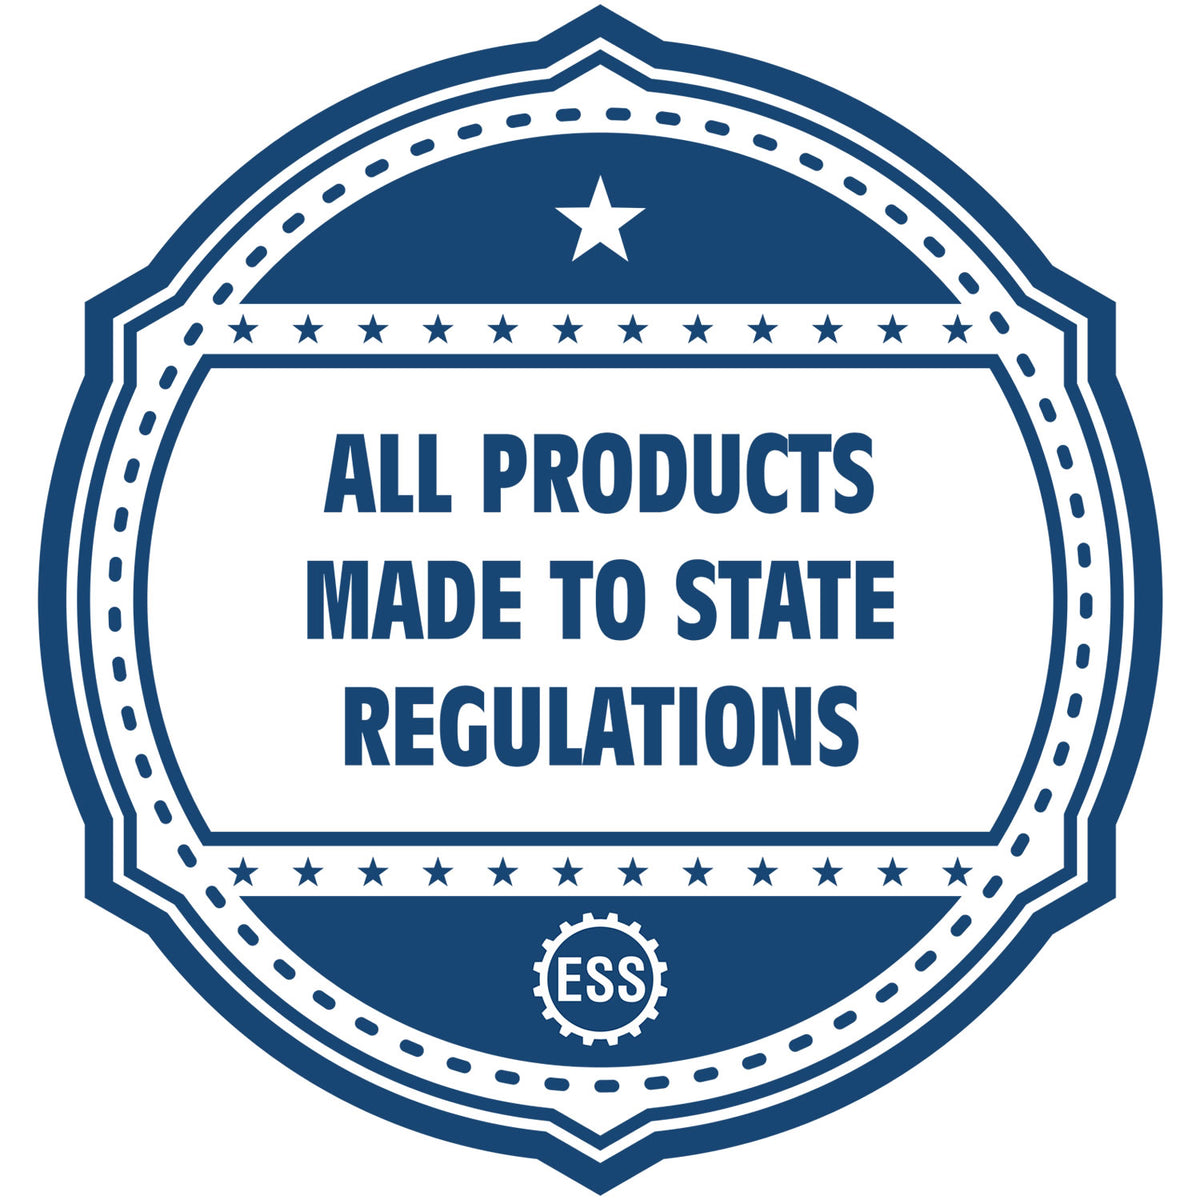 An icon or badge element for the Slim Pre-Inked Florida Professional Engineer Seal Stamp showing that this product is made in compliance with state regulations.